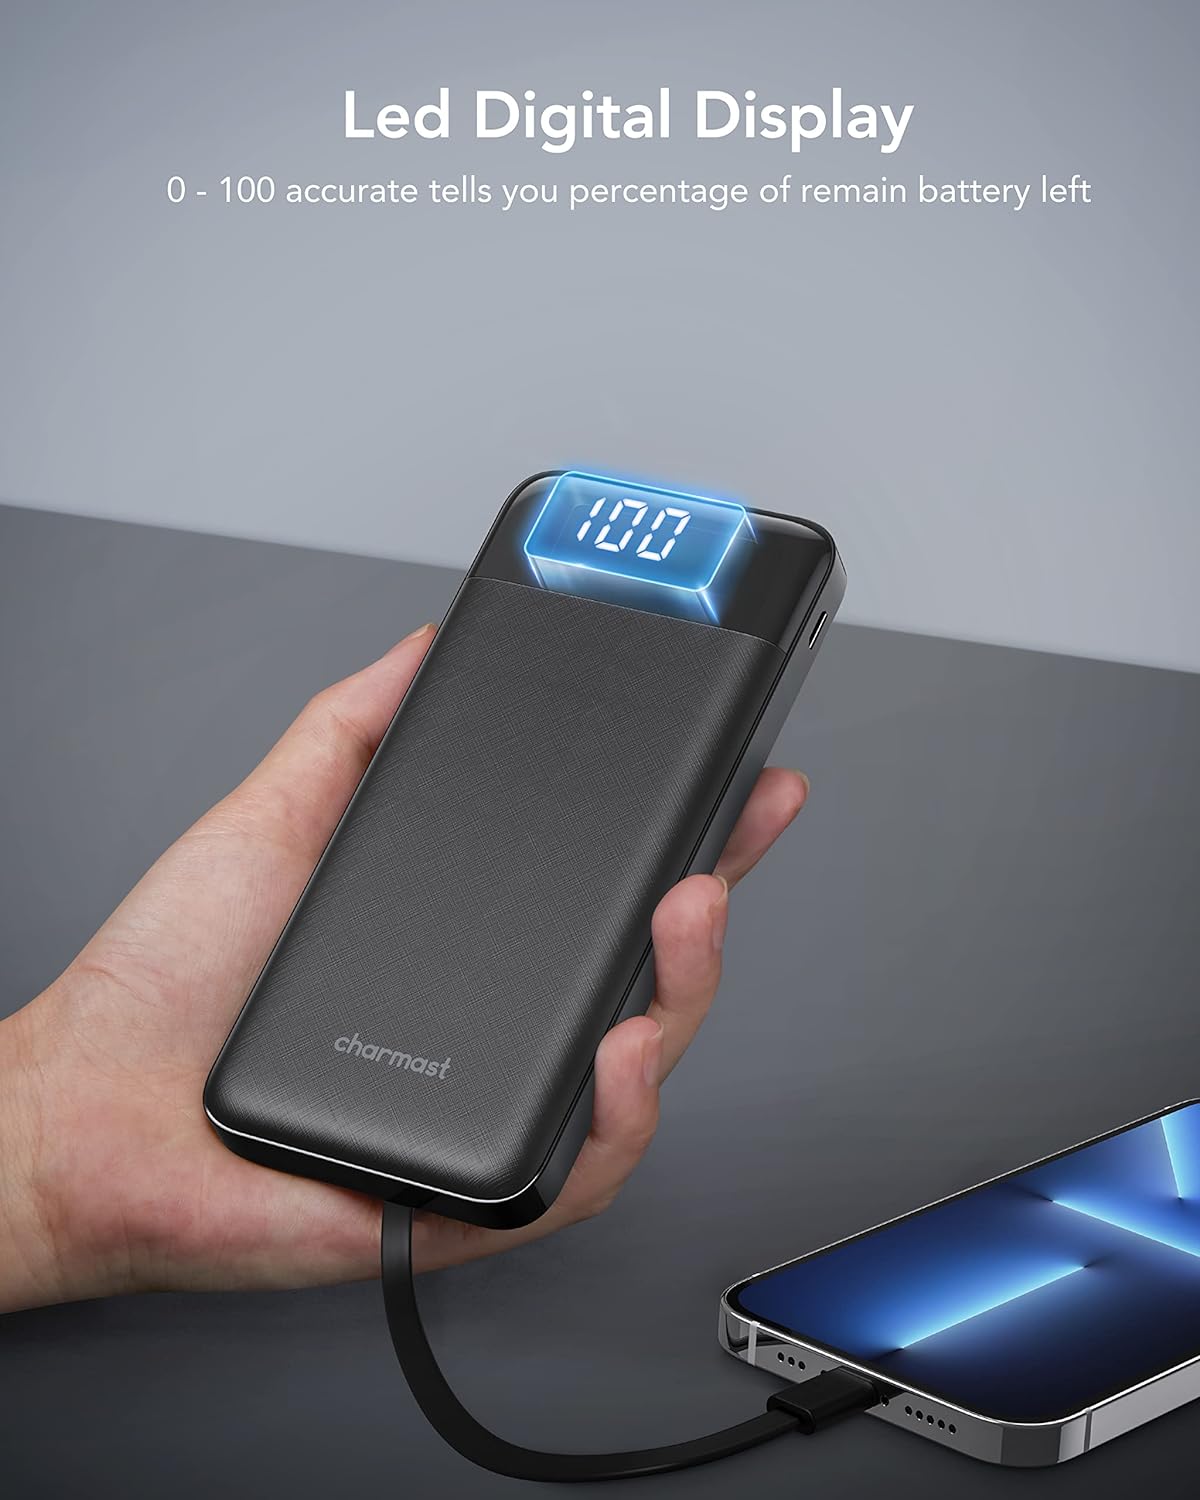 Charmast Power Bank with Built in Cable, 10000mAh USB C Battery pack 6 Outputs 2 Inputs with LED Display Type C Powerbank Portable Charger Compatible with Smartphones Tablets and More